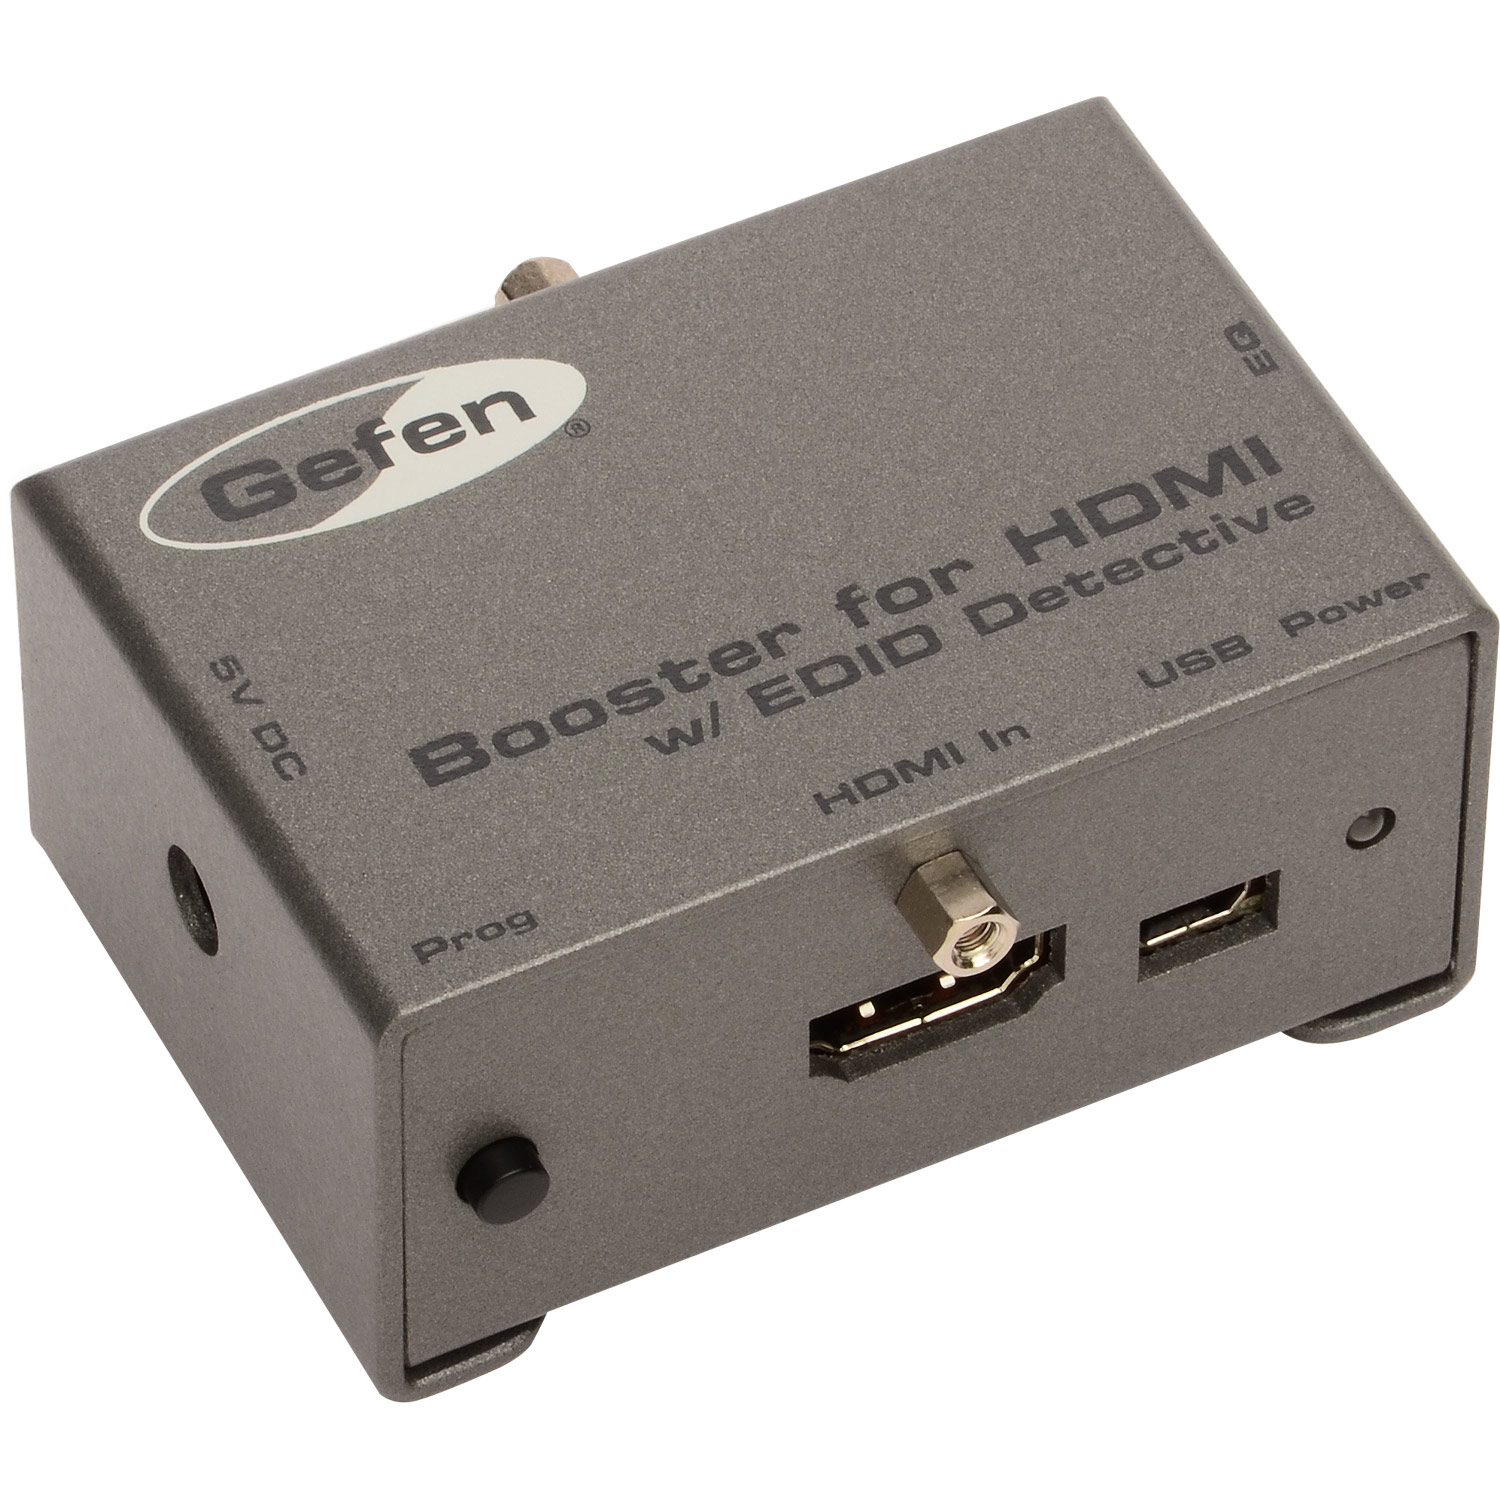 Booster for HDMI with EDID Detective | Gefen